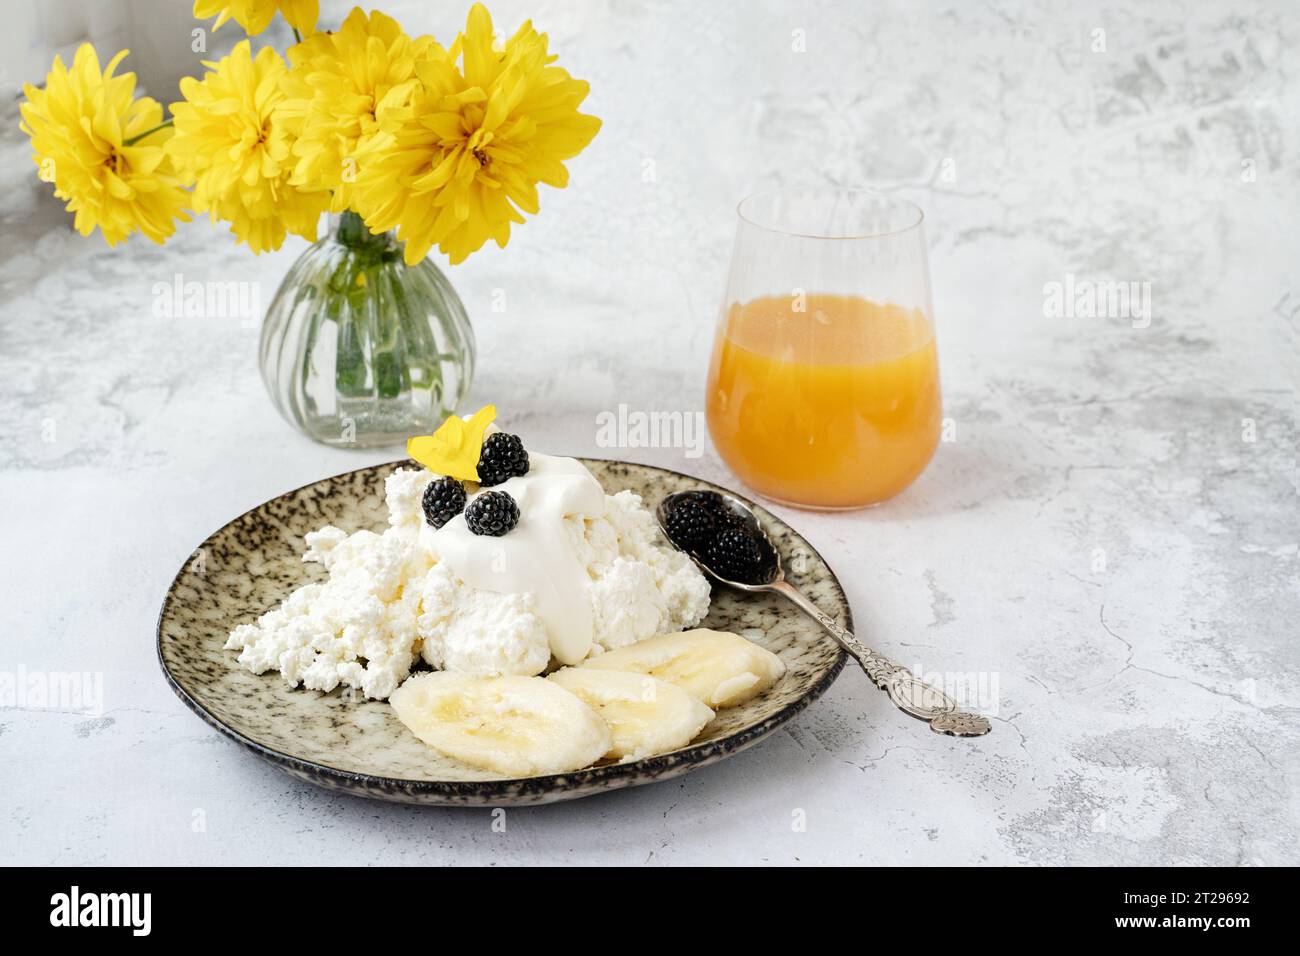 Farm fresh cottage cheese with berries and banana slices. Early breakfast of cottage cheese with fruit and natural juice. Stock Photo